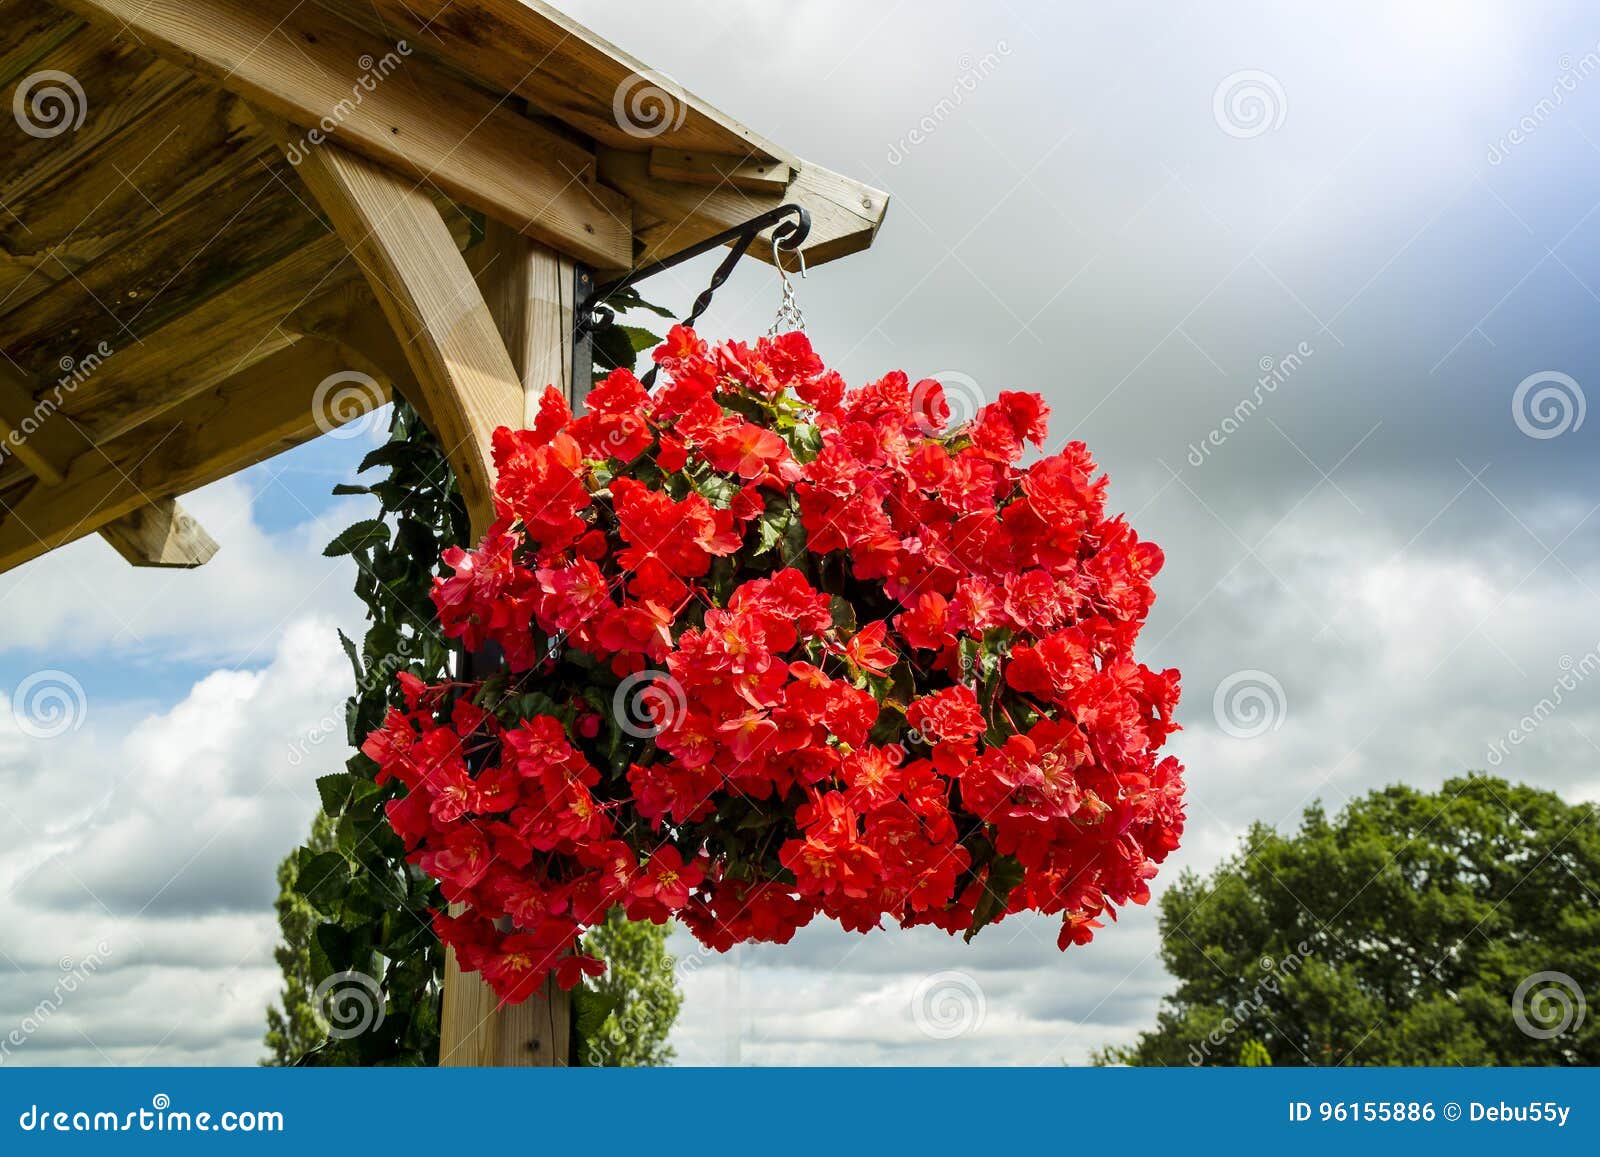 bright red begonia flowers in a hanging basket.